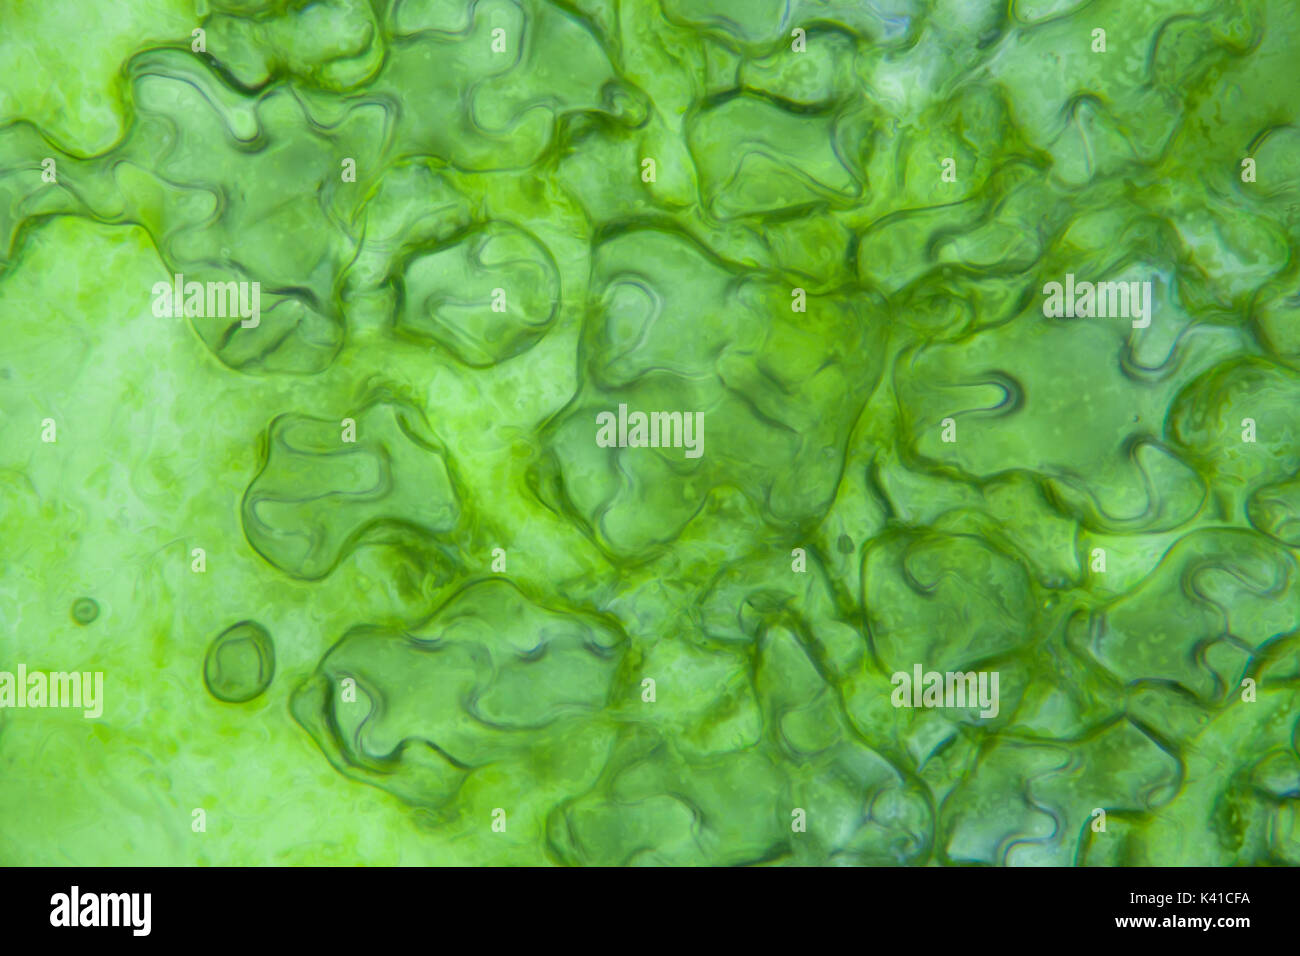 Lettuce cells under microscope, magnification x 400 Stock Photo